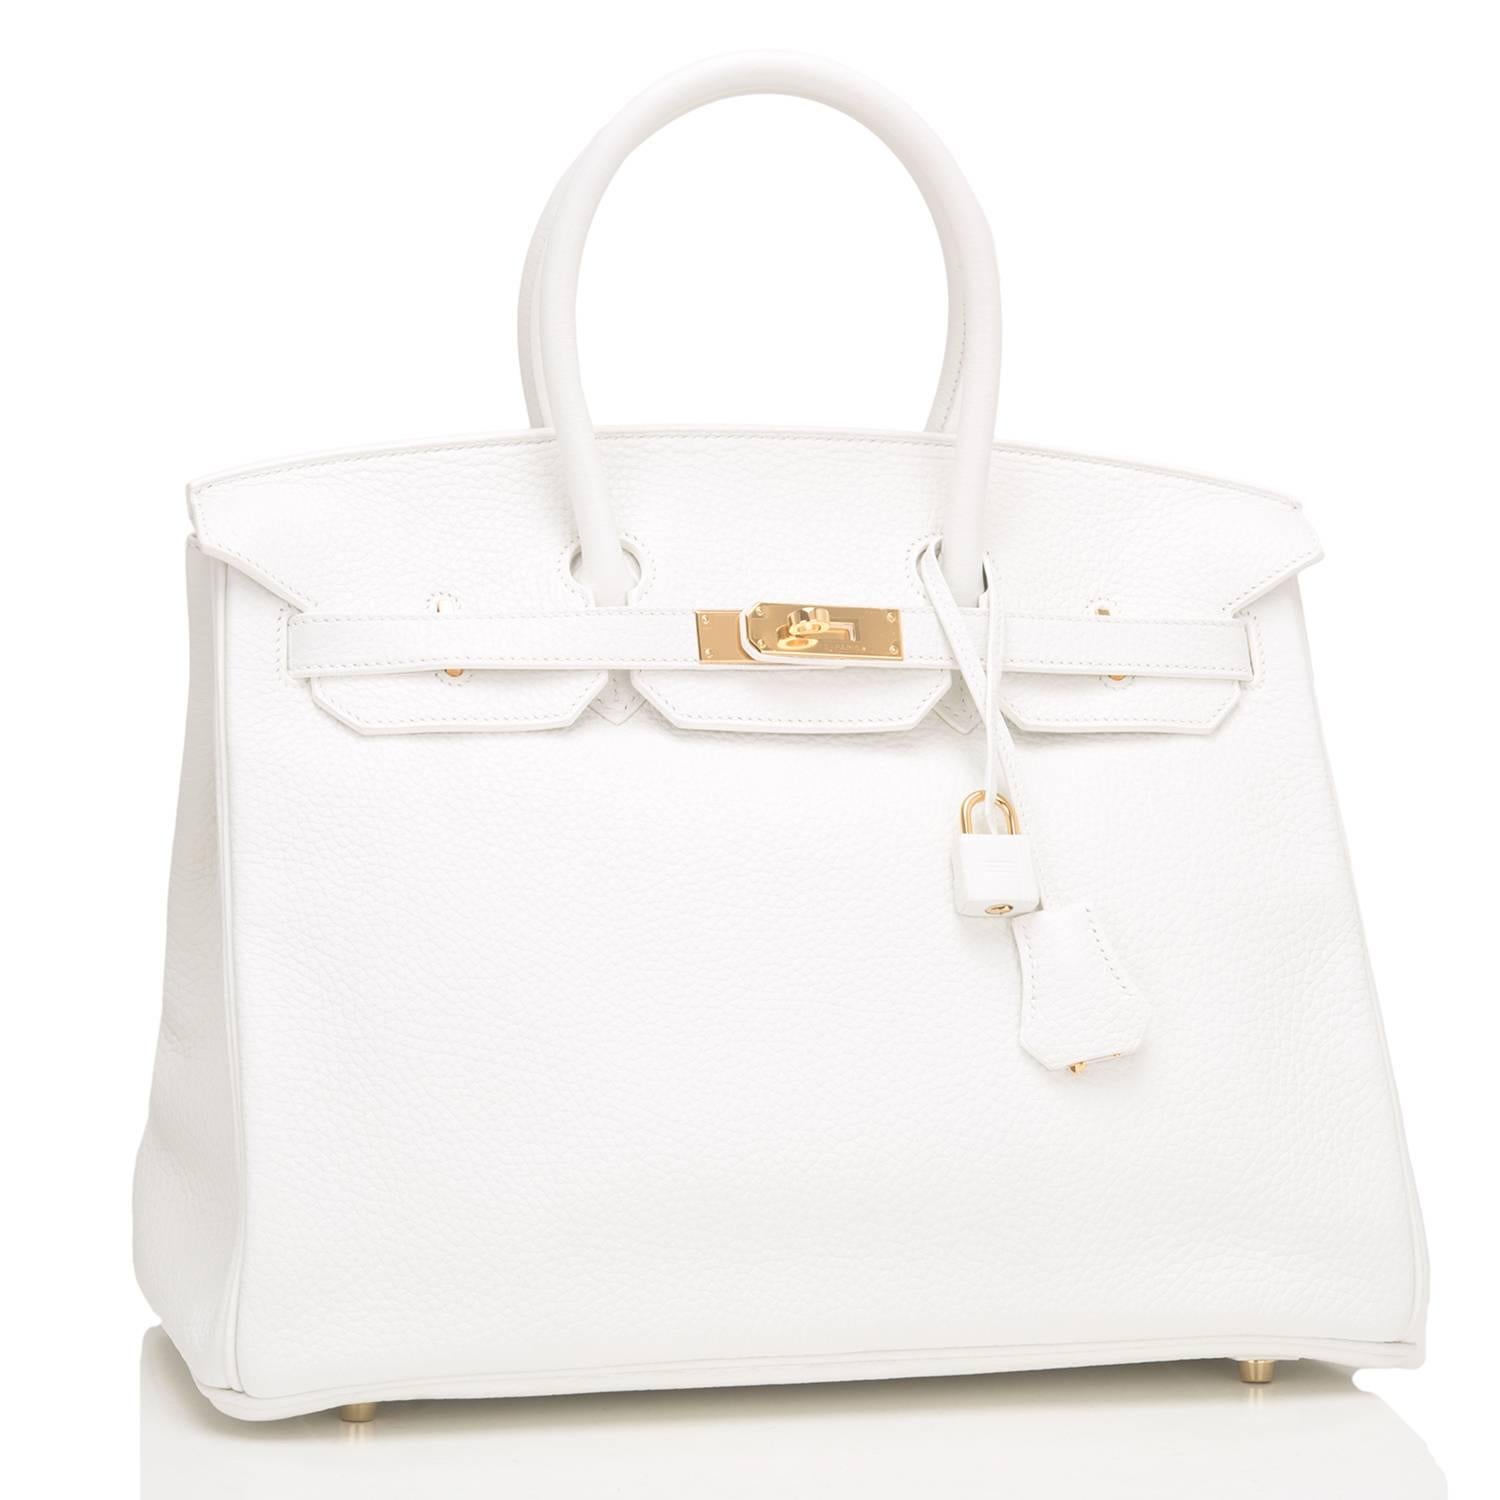 Hermes white Birkin 35cm of taurillon clemence leather with gold hardware.

This white Birkin features tonal stitching, a front toggle closure, a clochette with lock and two keys, and double rolled handles.

The interior is lined with white chevre